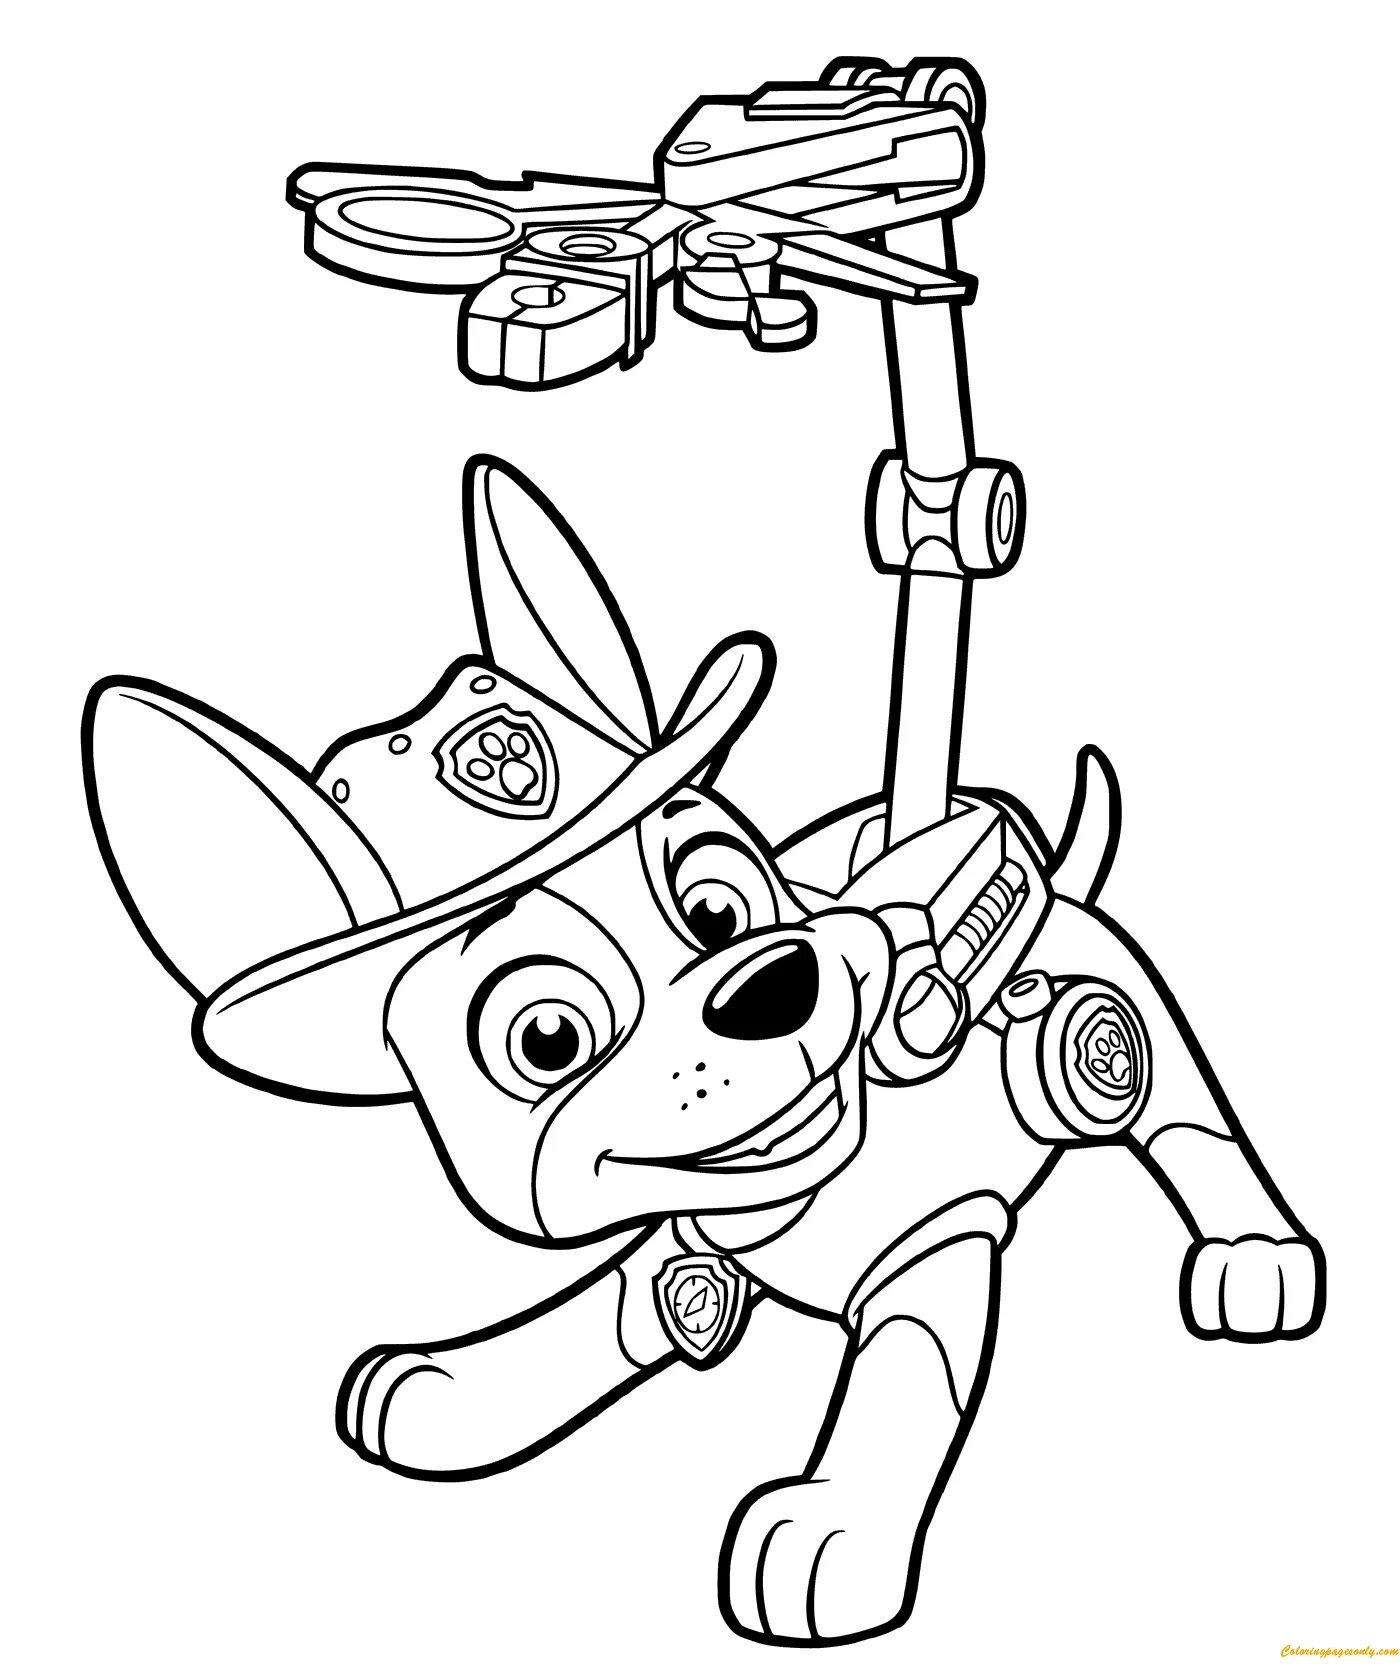 Outstanding paw patrol coloring page